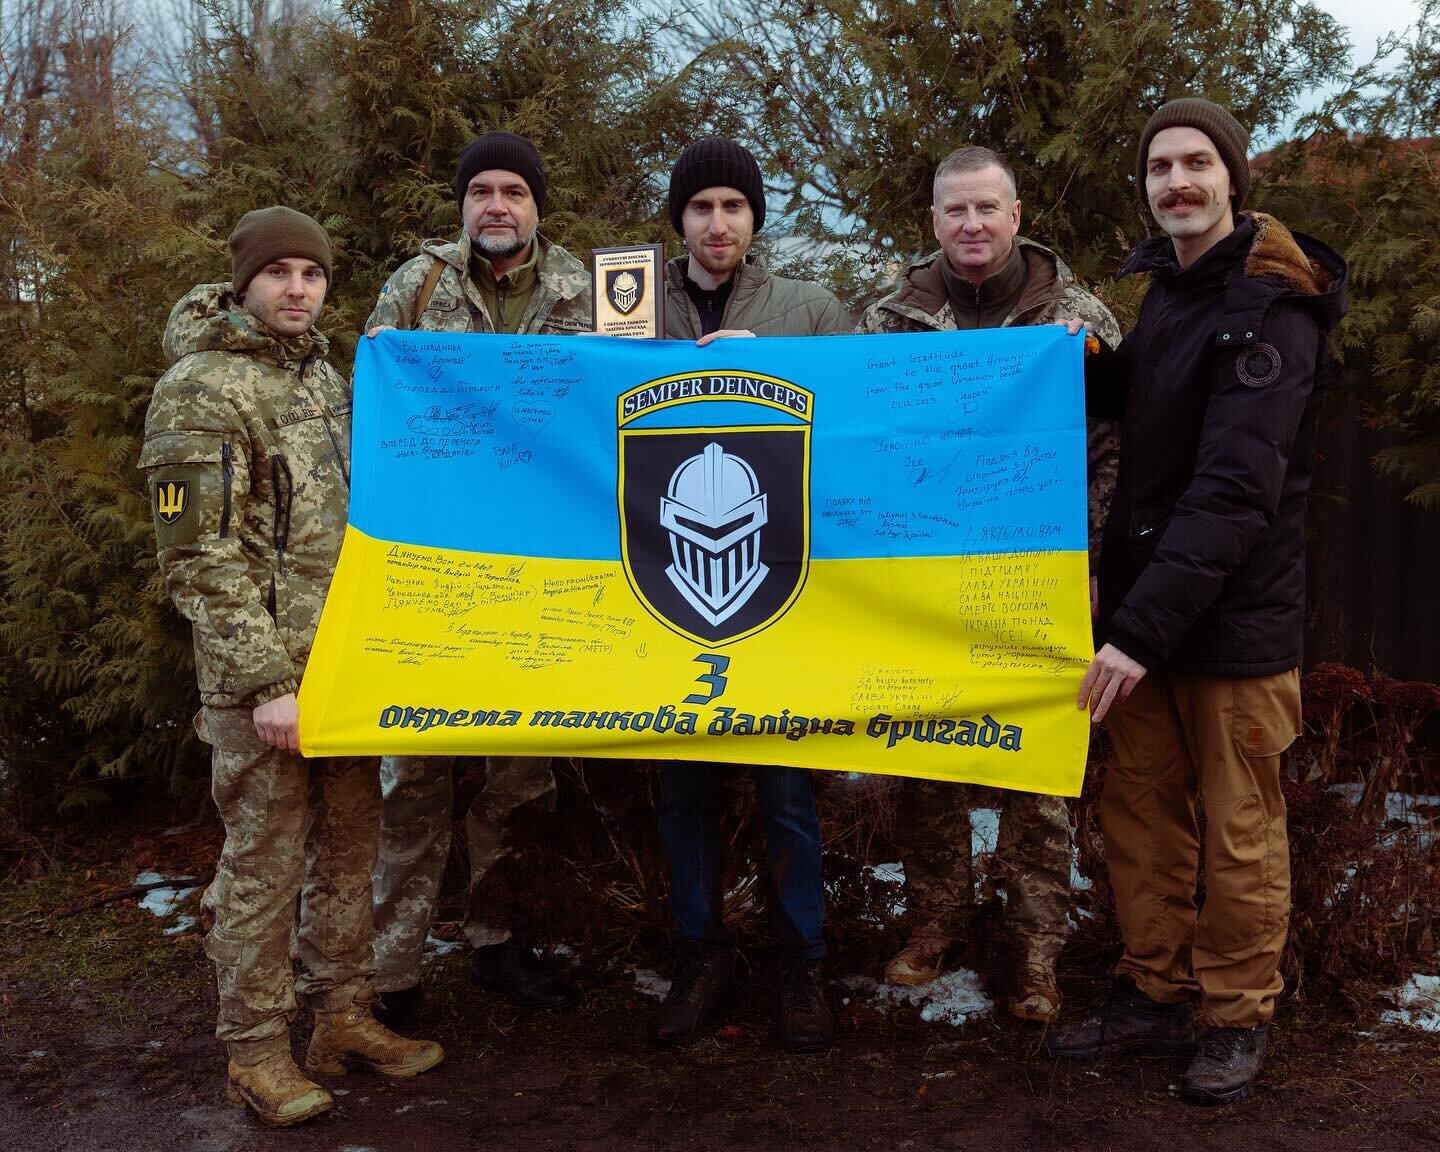 Another successful working trip to Ukraine is complete. It&rsquo;s been a busy, tiring, yet rewarding month, and I&rsquo;m grateful for the opportunity to continue documenting this ongoing war. After all the time I&rsquo;ve spent there over the past 